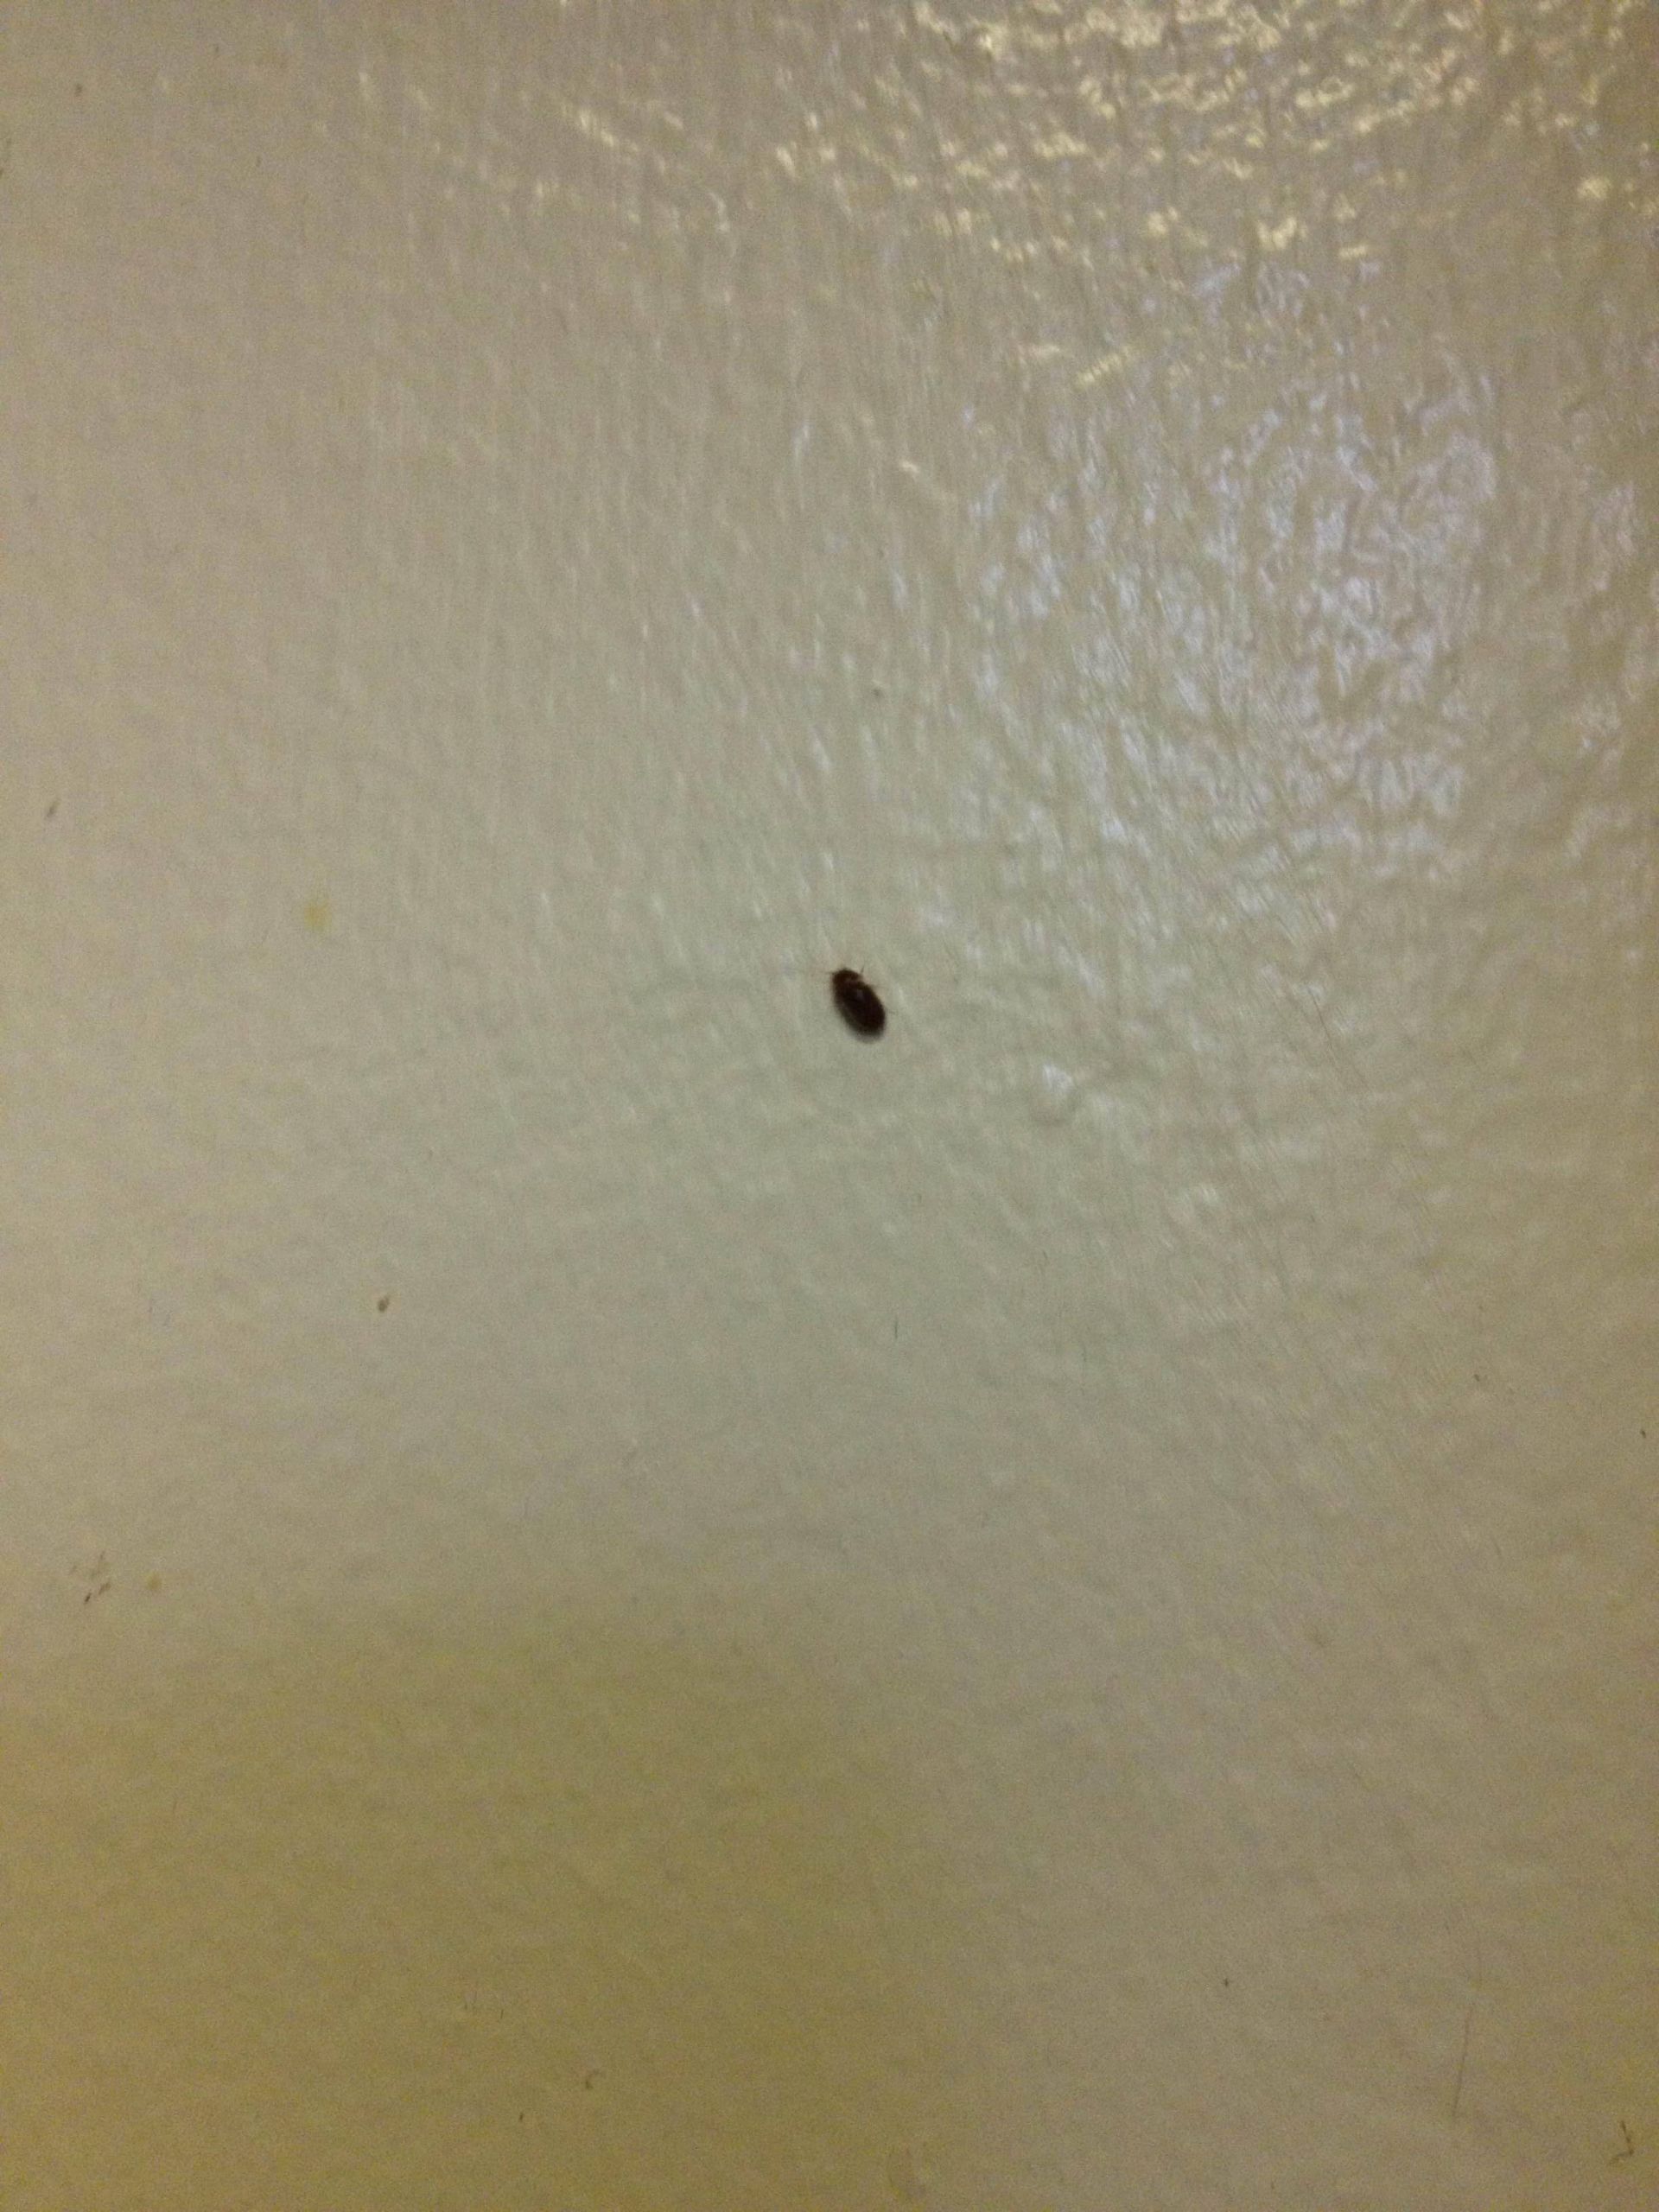 Small Bugs In Kitchen Awesome Pest Control Bugs In Kitchen Home Improvement Stack Of Small Bugs In Kitchen Scaled 